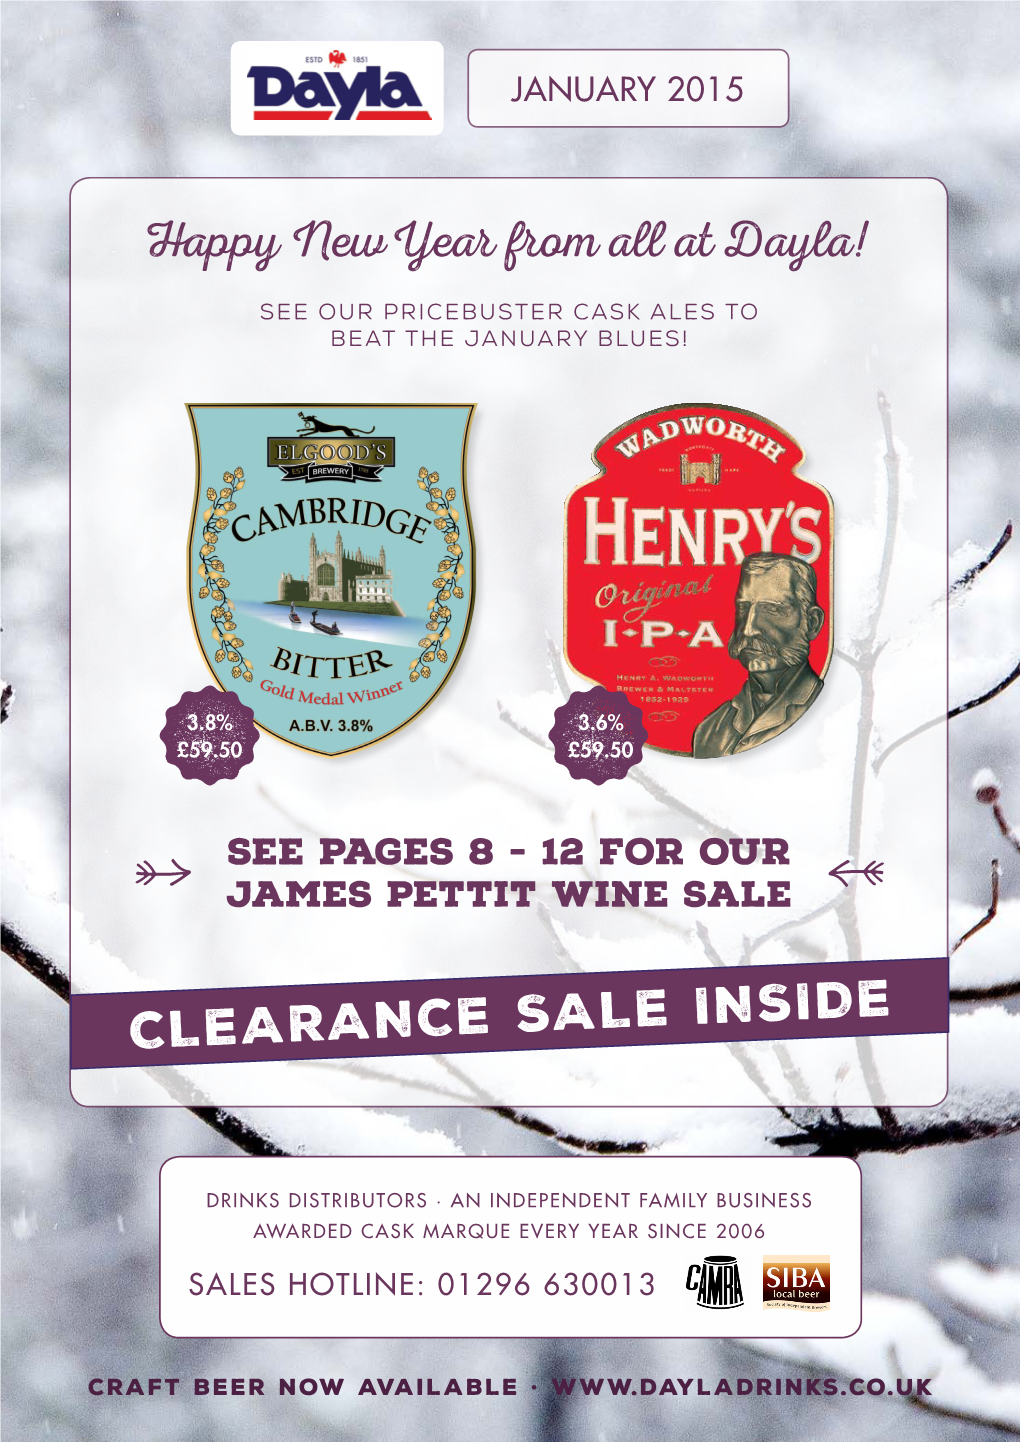 Happy New Year from All at Dayla! See Our Pricebuster Cask Ales to Beat the January Blues!